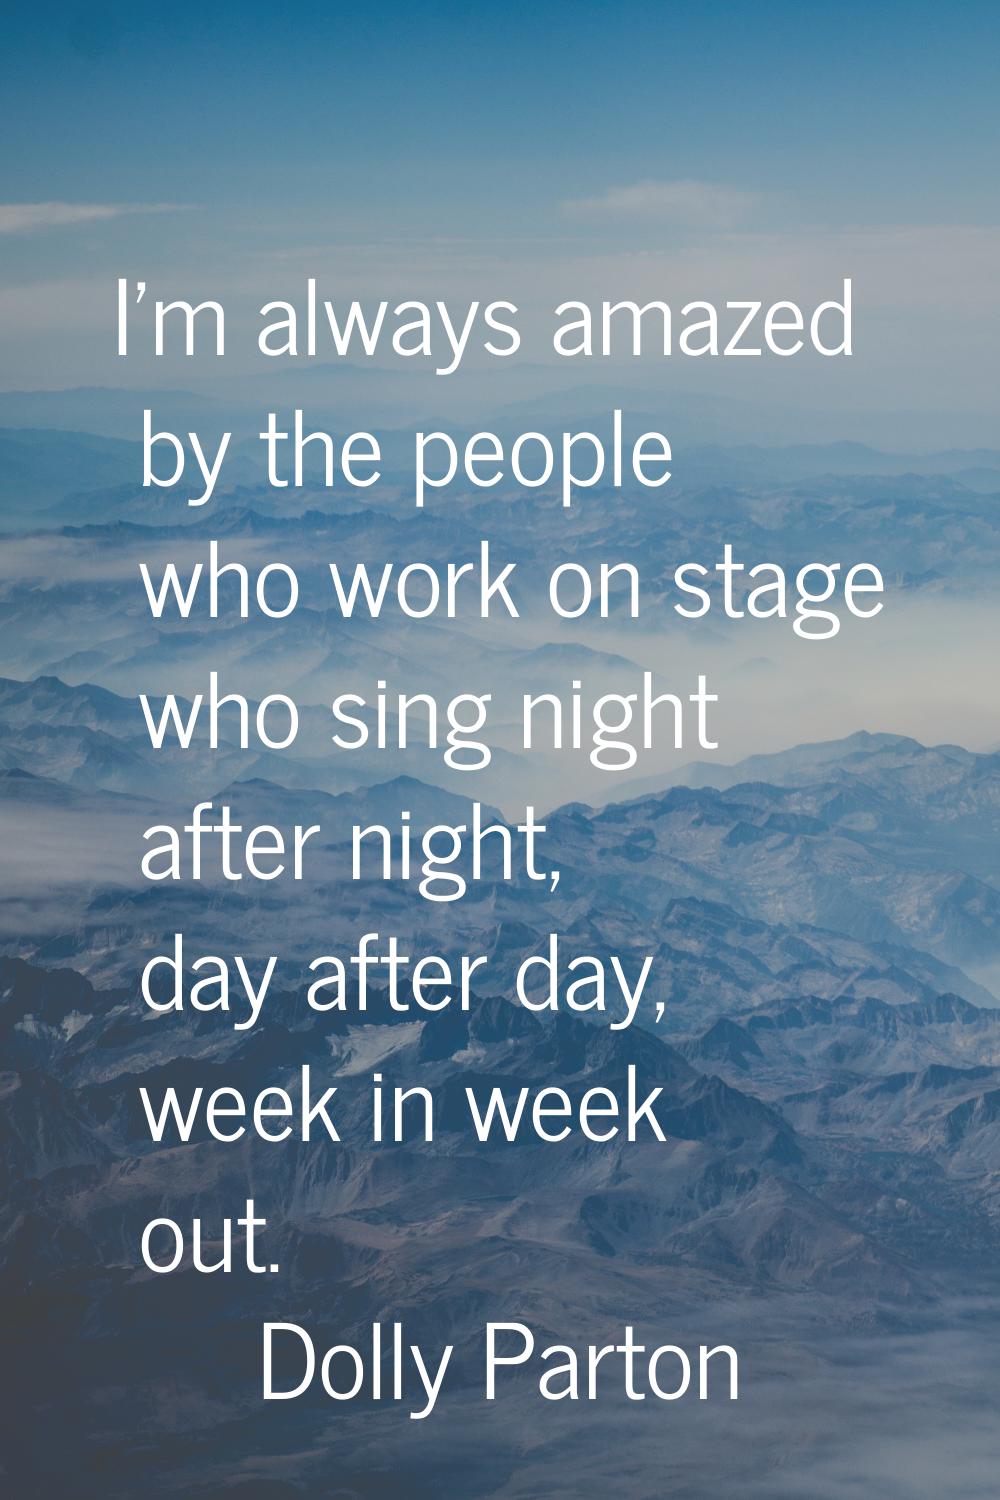 I'm always amazed by the people who work on stage who sing night after night, day after day, week i